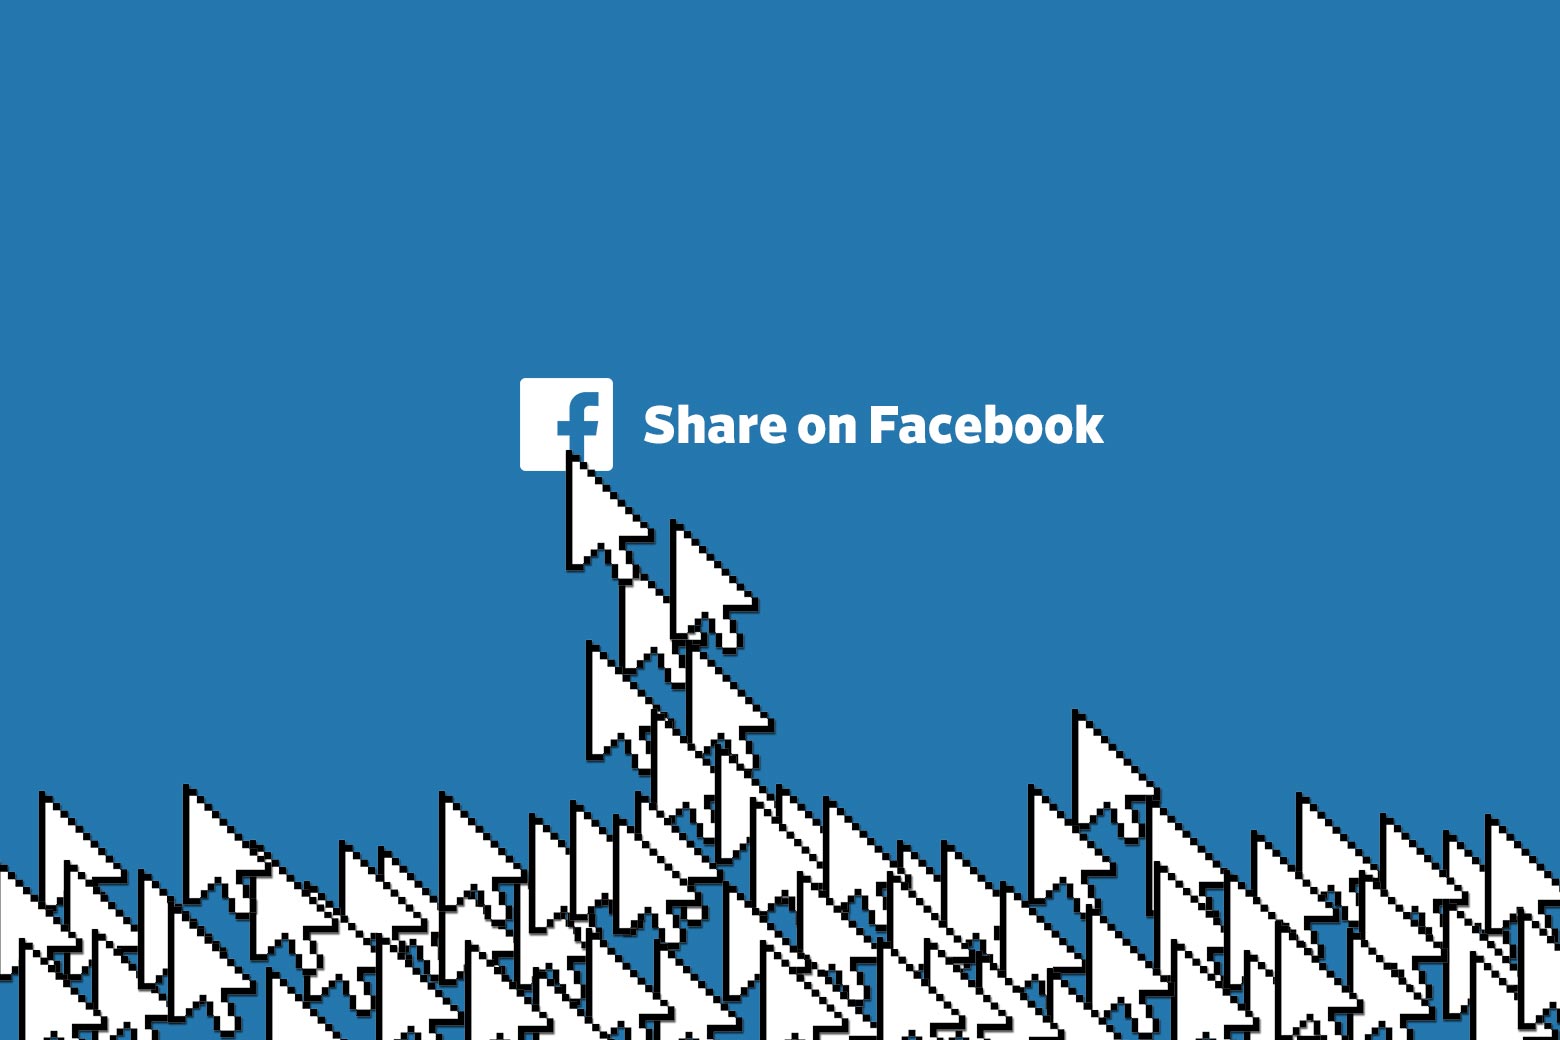 A bunch of arrow icons clicking on "Share on Facebook."